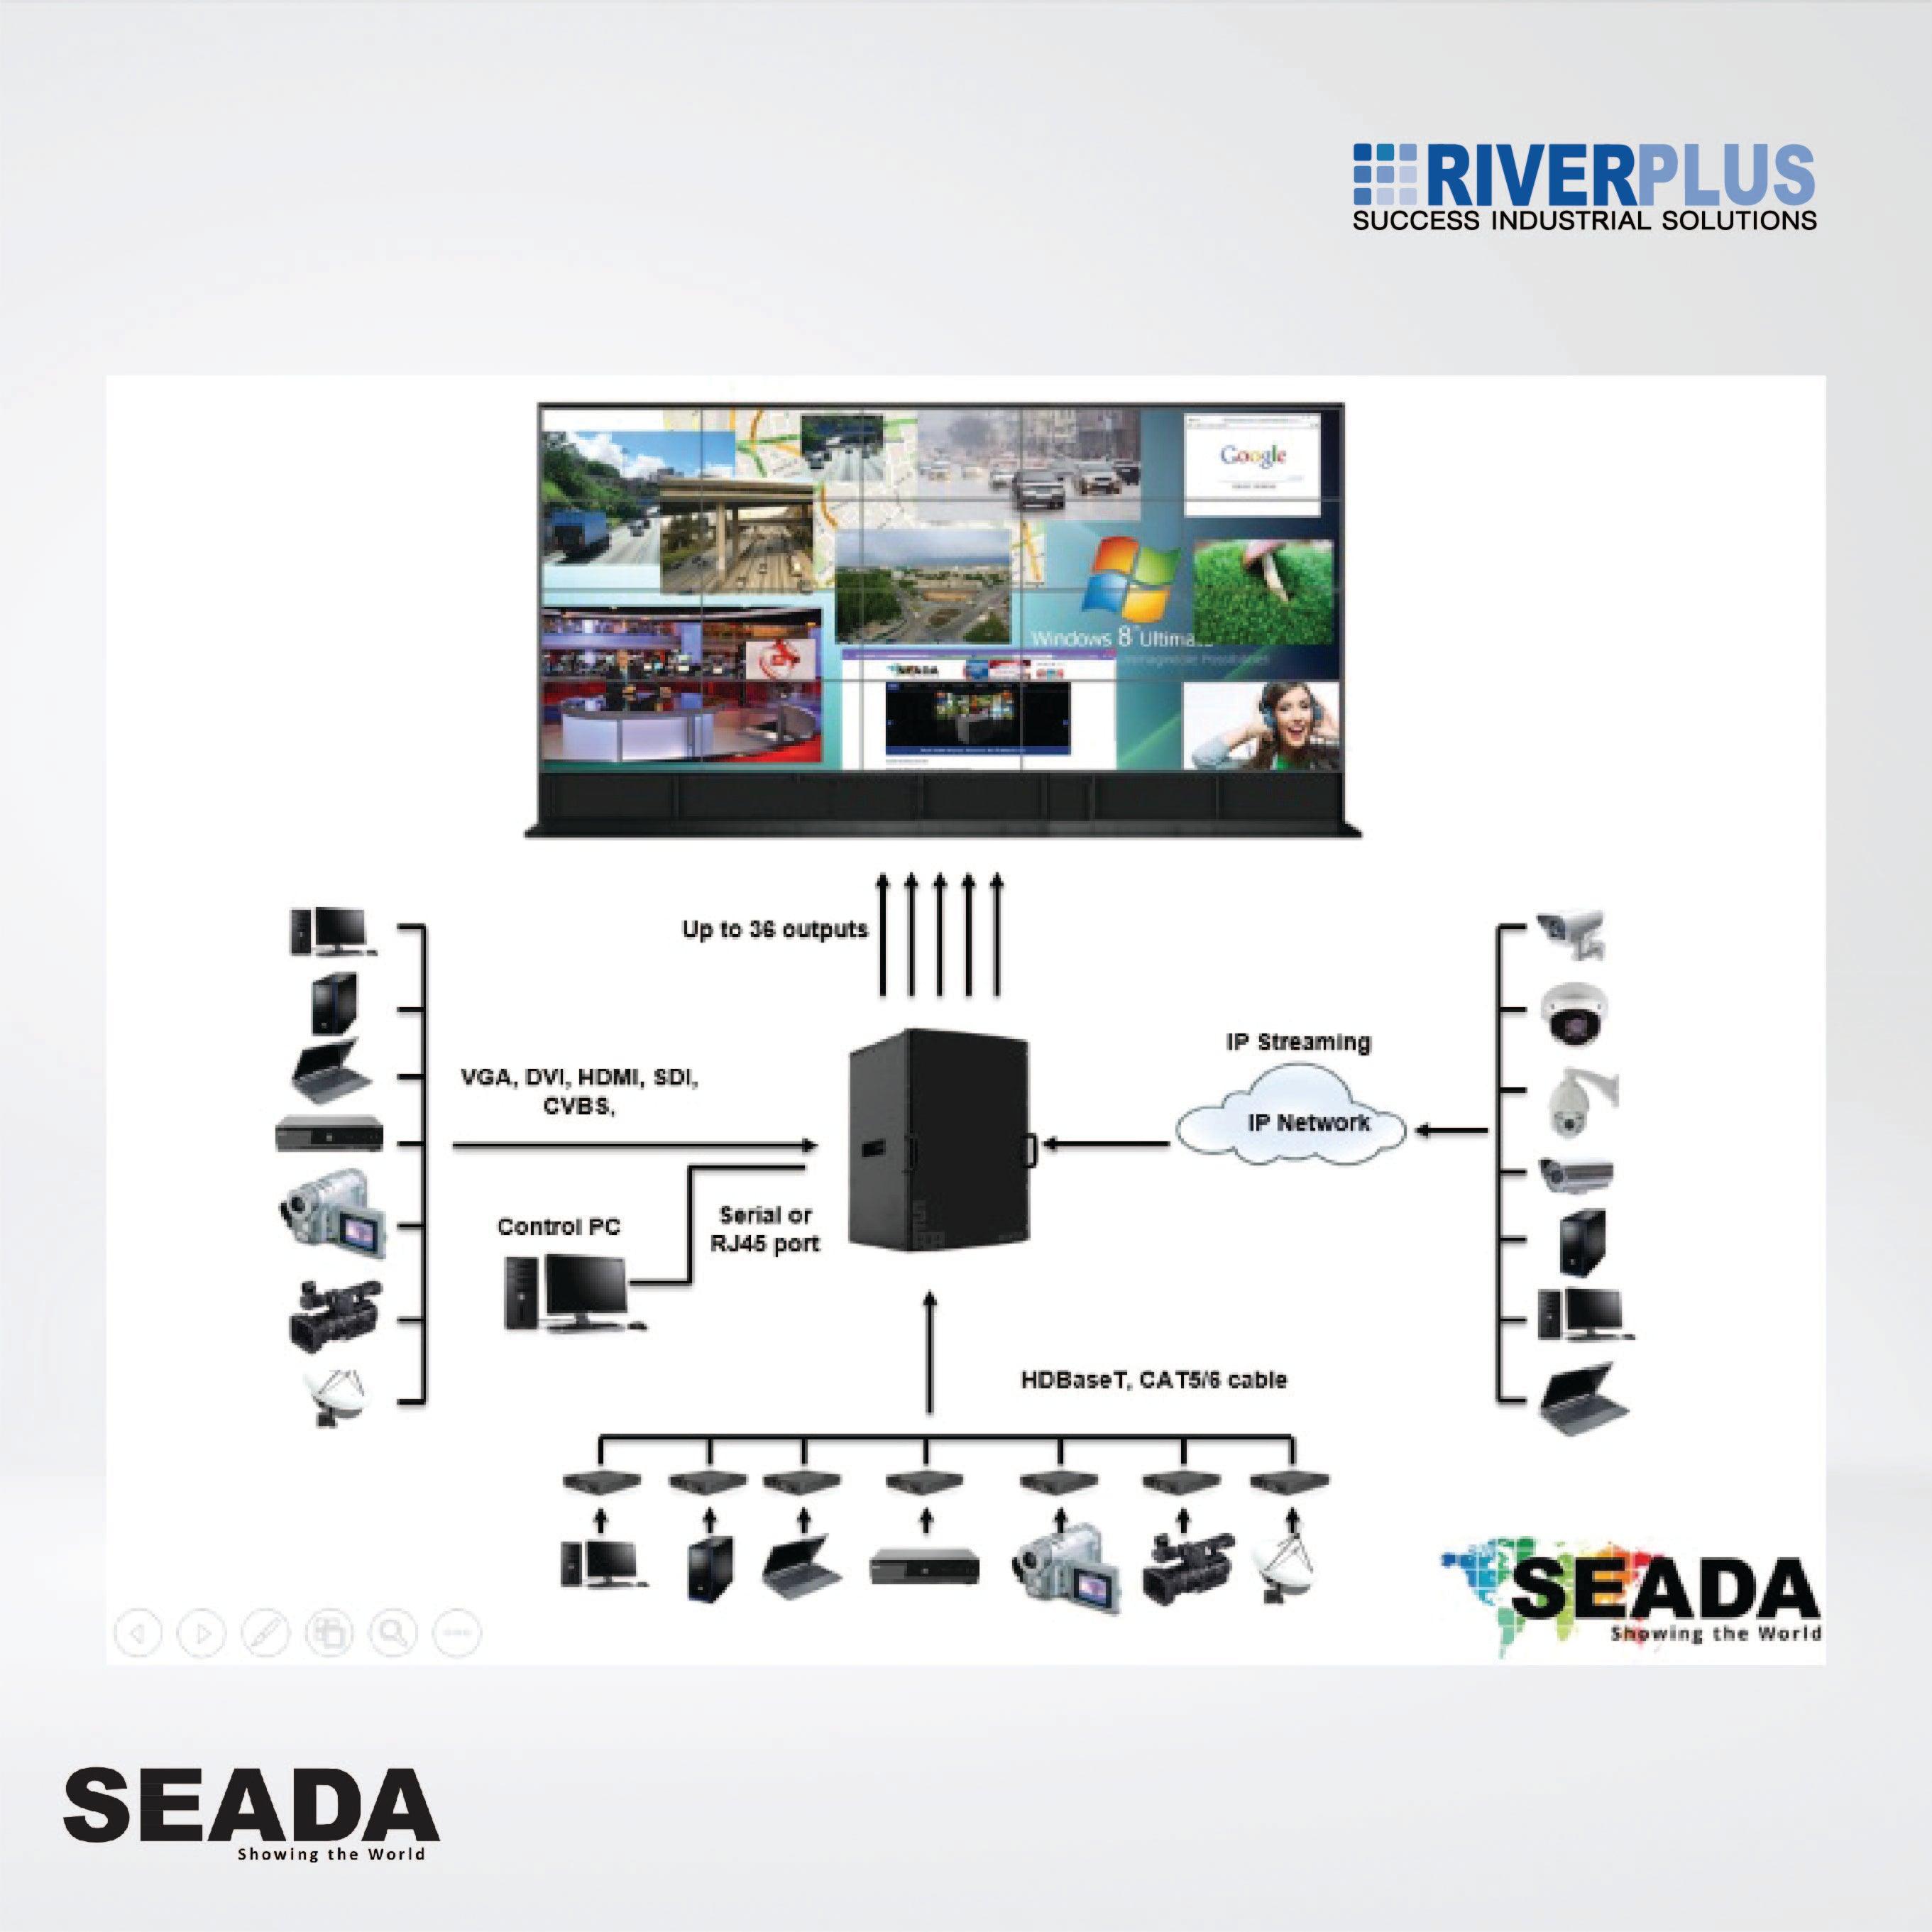 SW8036 Video wall controller designed for large size 4K video wall ,Support maximum 36 4K displays - Riverplus